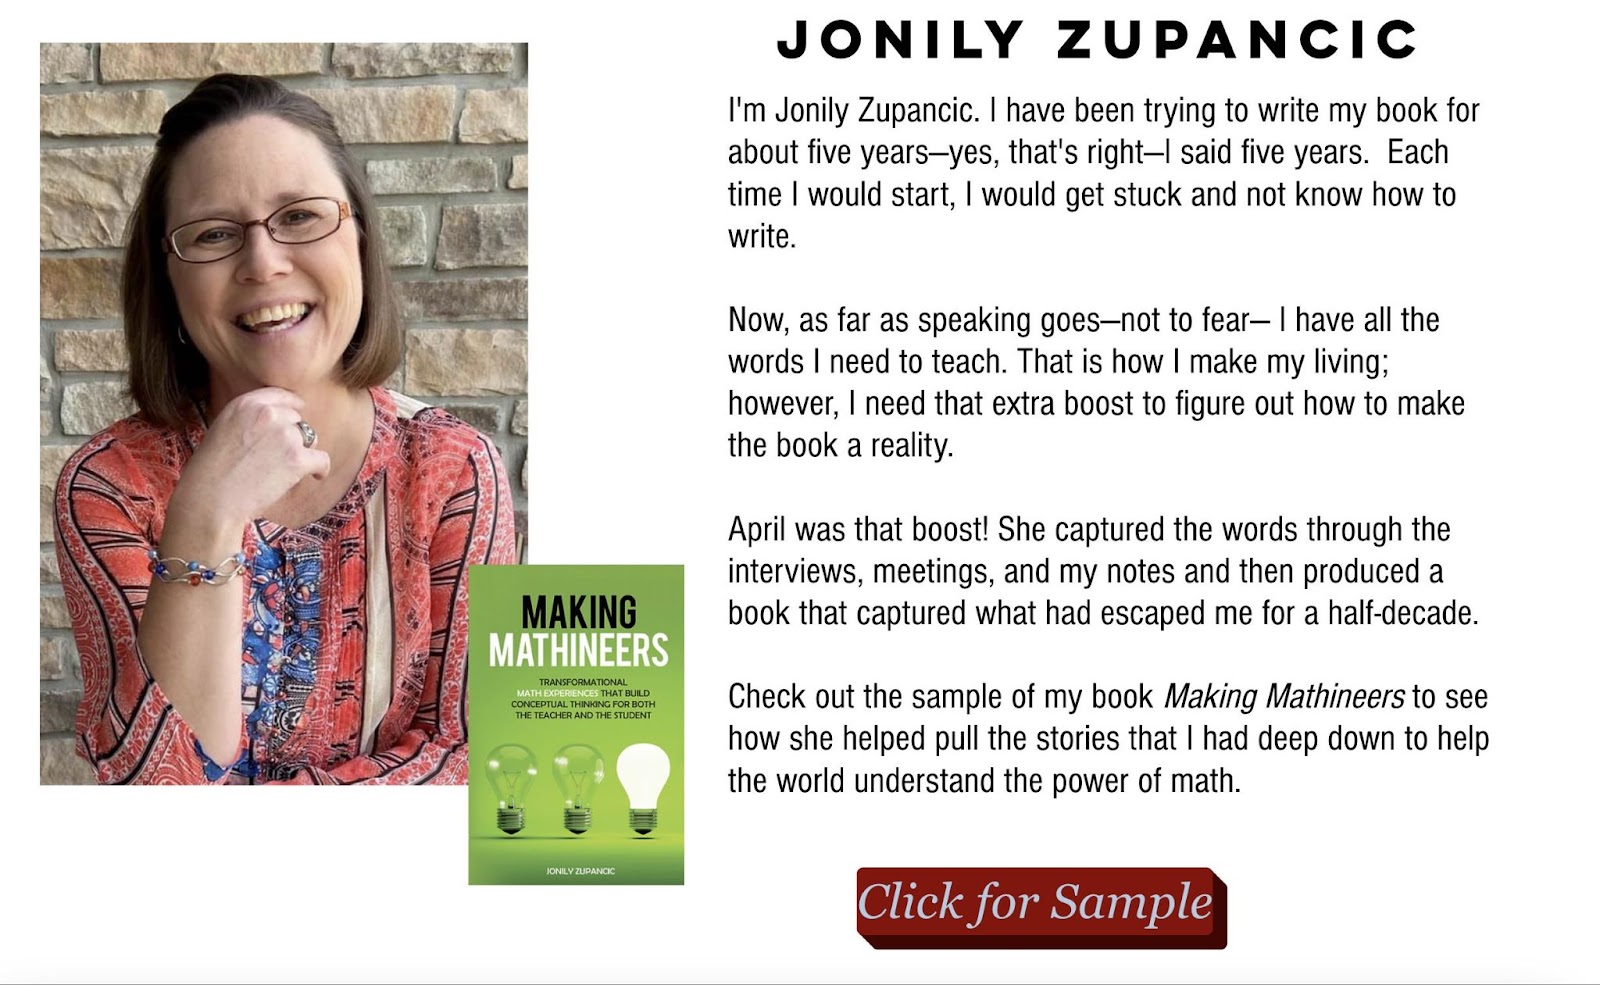 Jonily Zupancic's testimonial on April Tribe Giauque's book ghostwriting